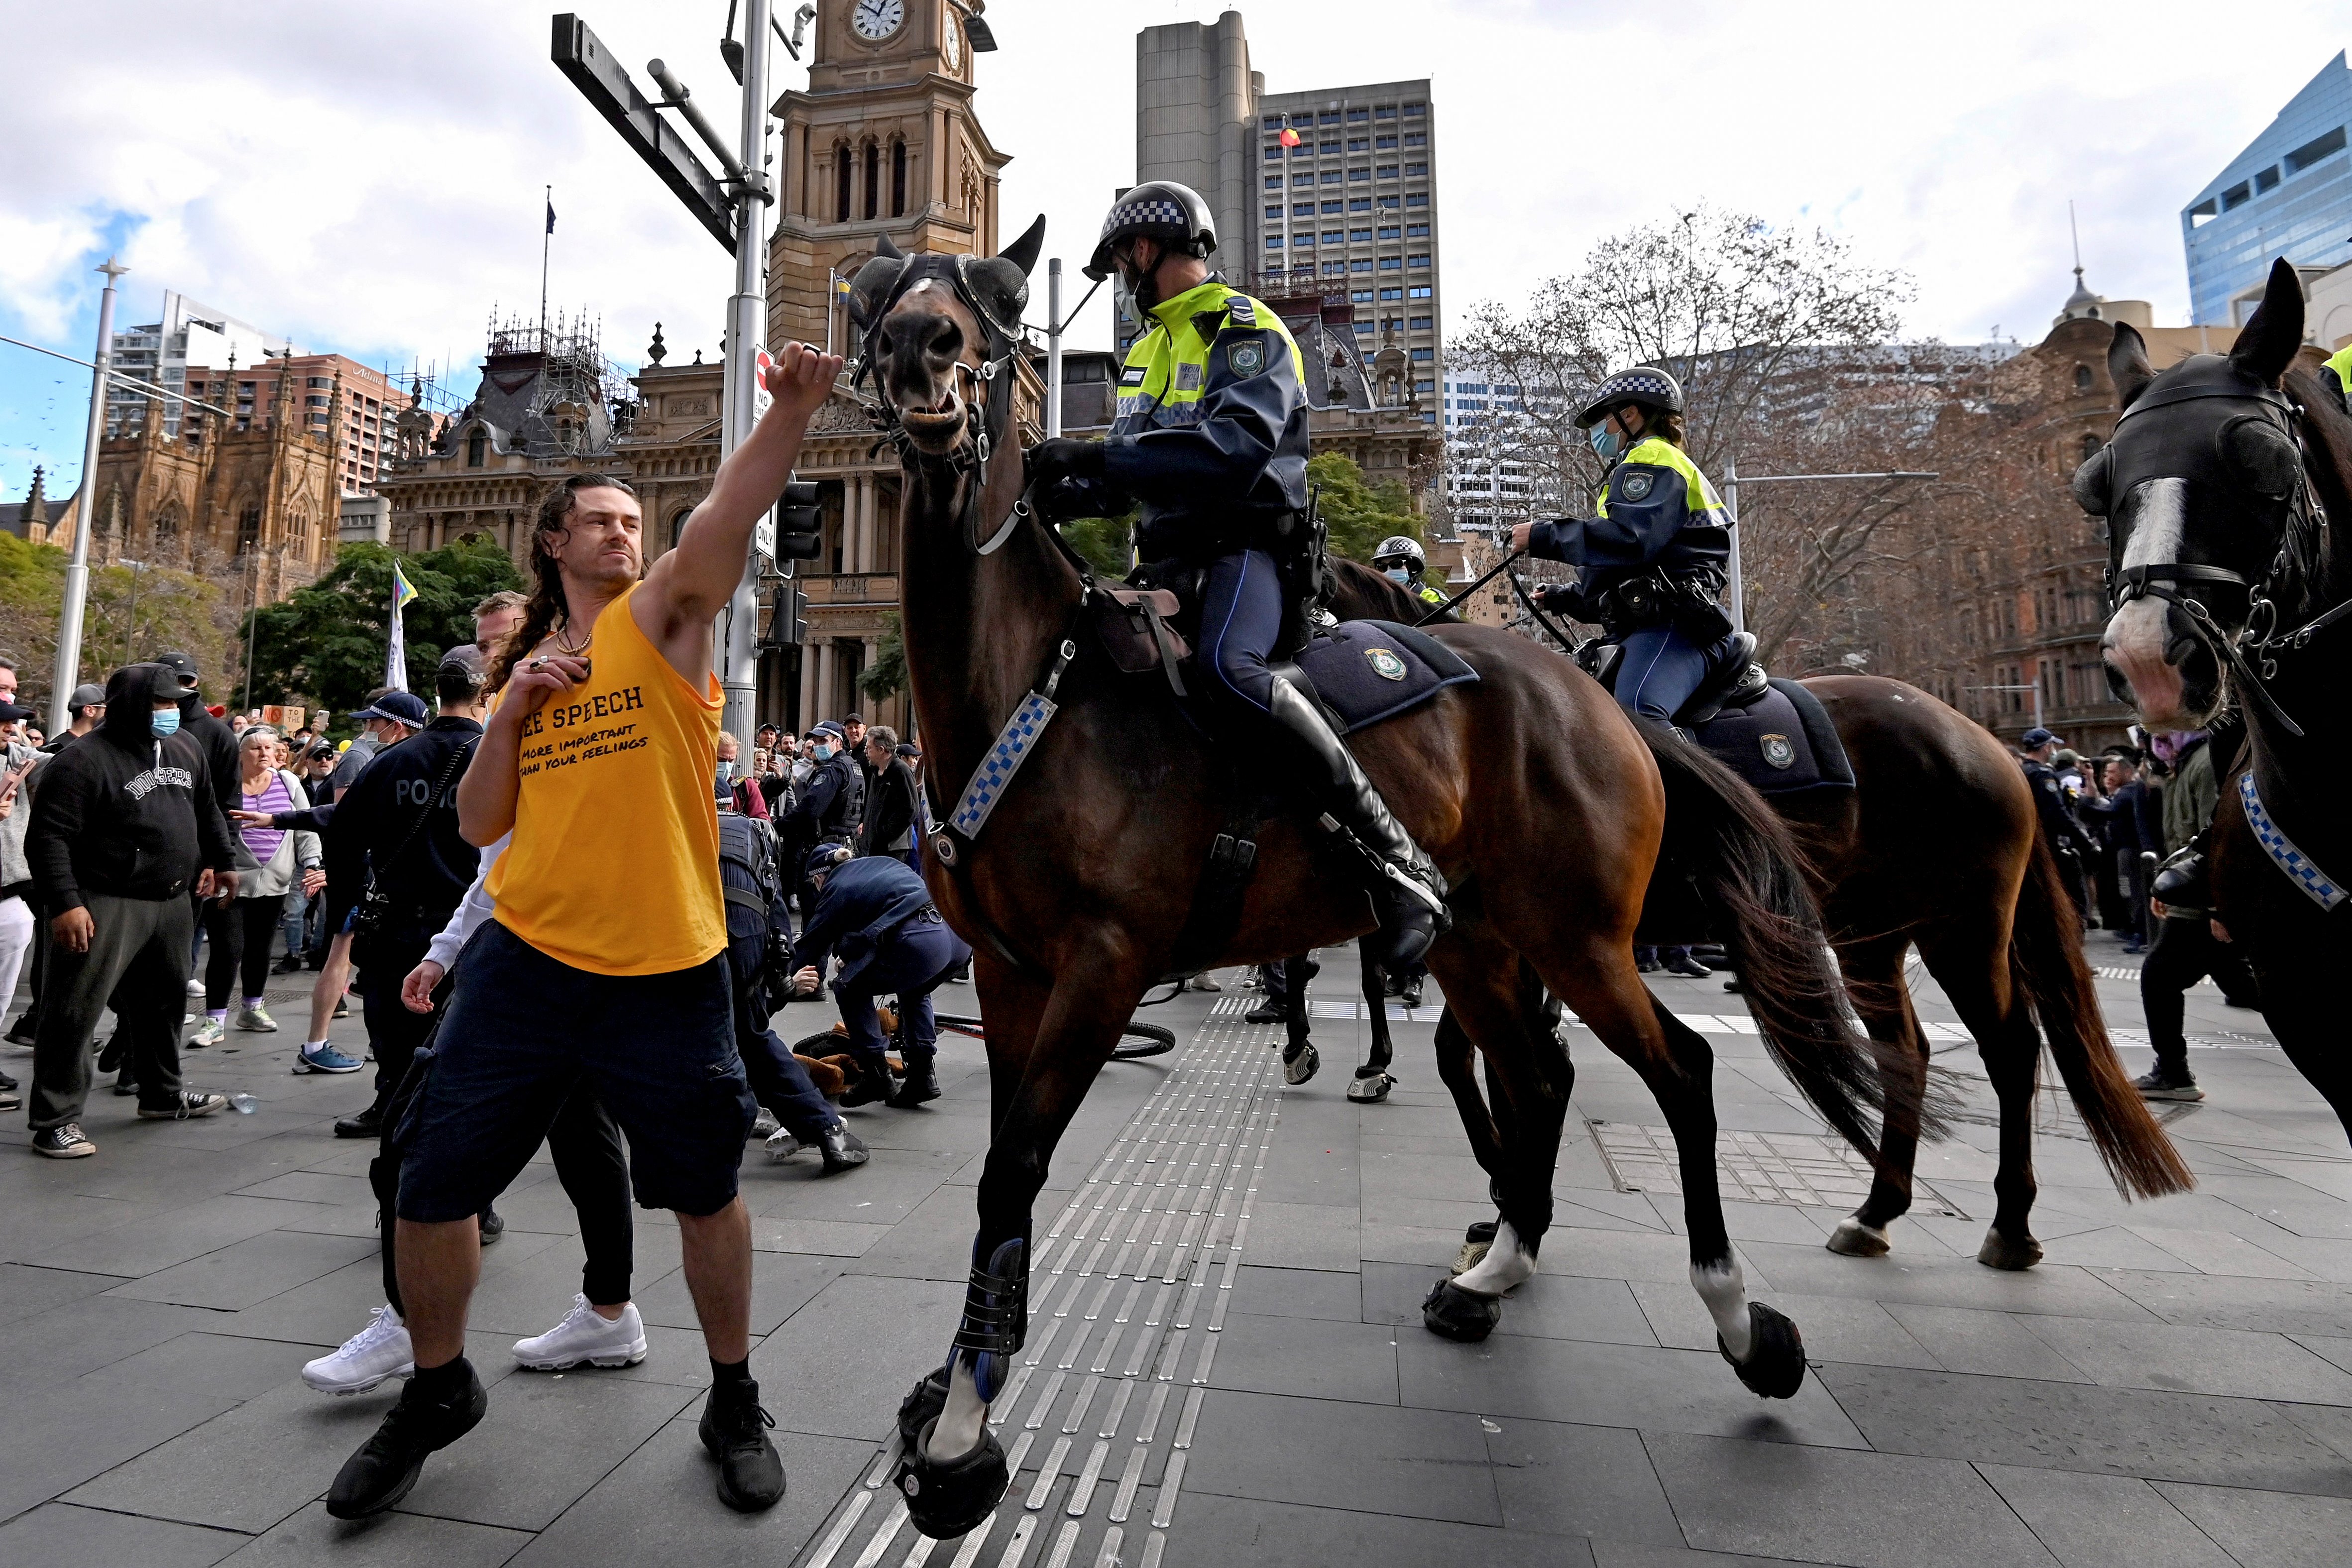 This image shows a protester appearing to punch a mounted horse in the head.